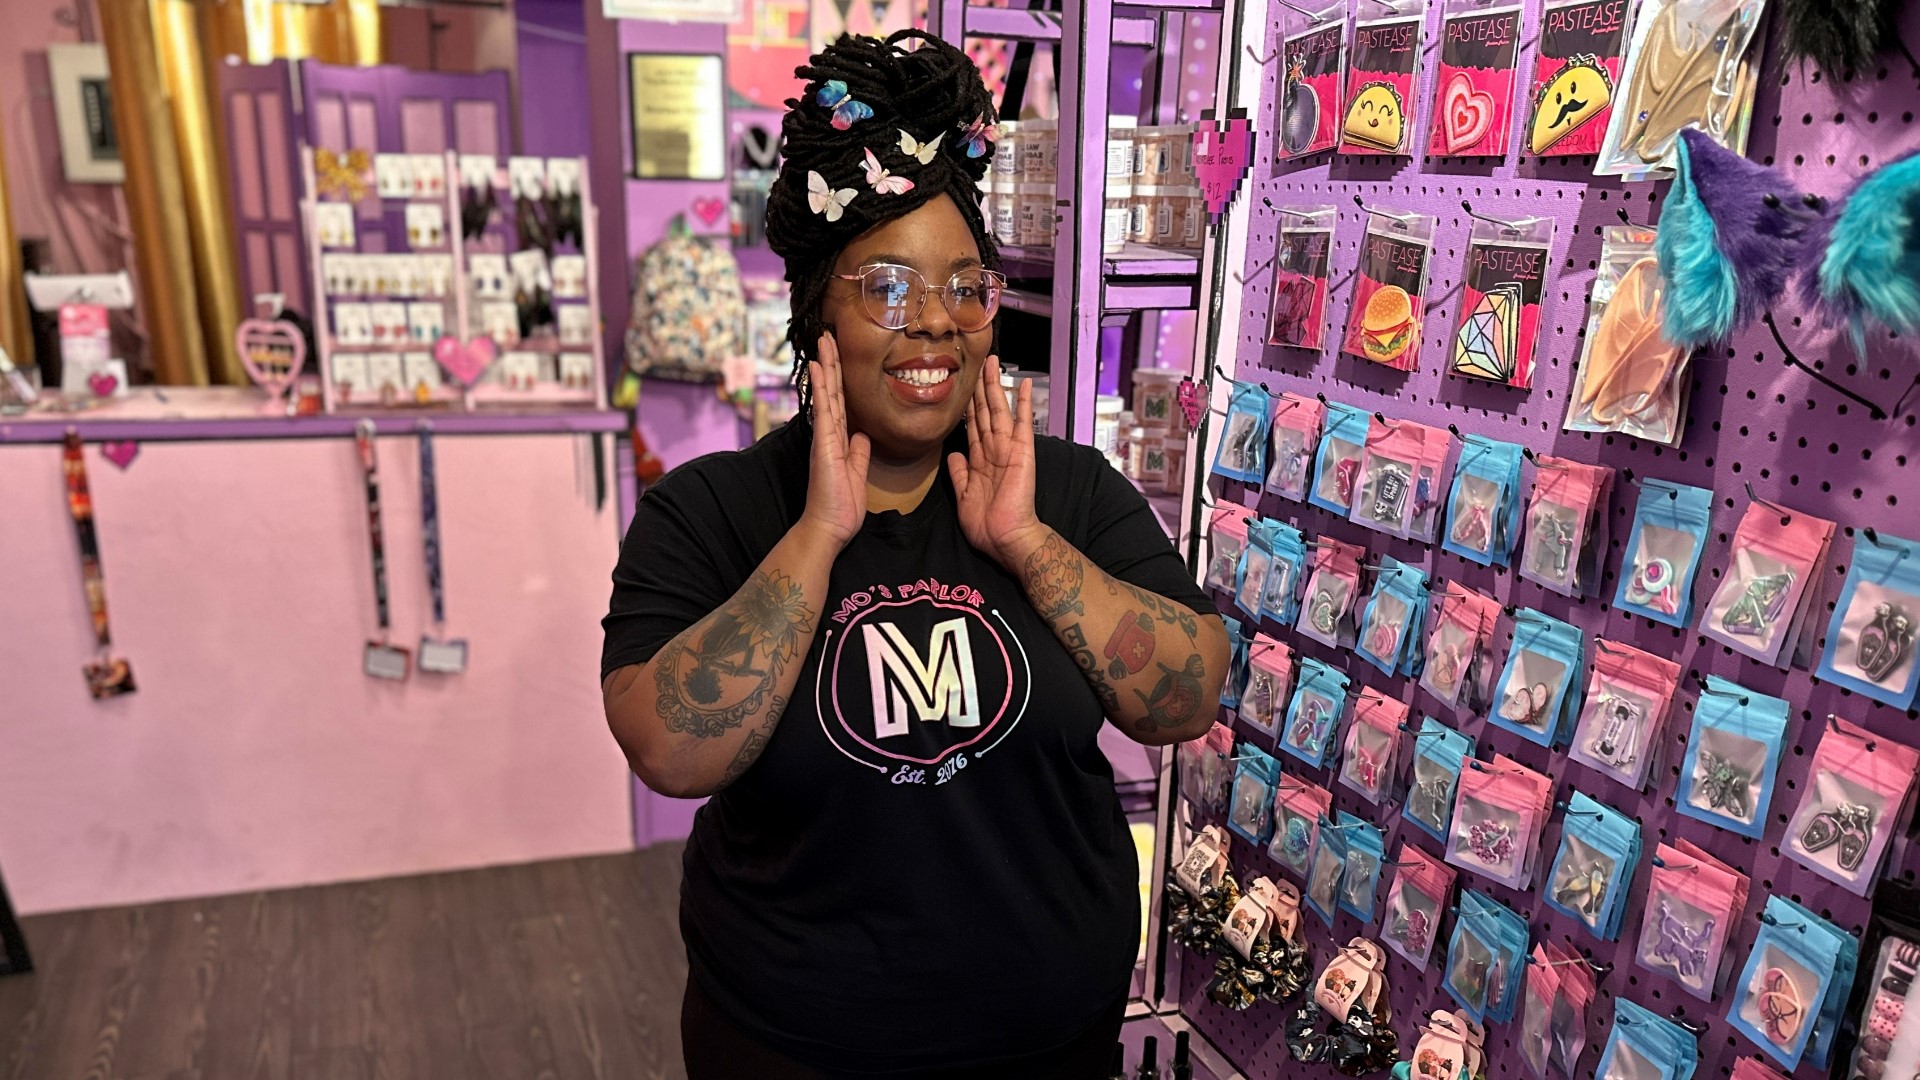 Mo's Parlor features an eclectic selection of cosplay, anime, comics, beauty products, jewelry, and everything else the owner has ever loved. #k5evening